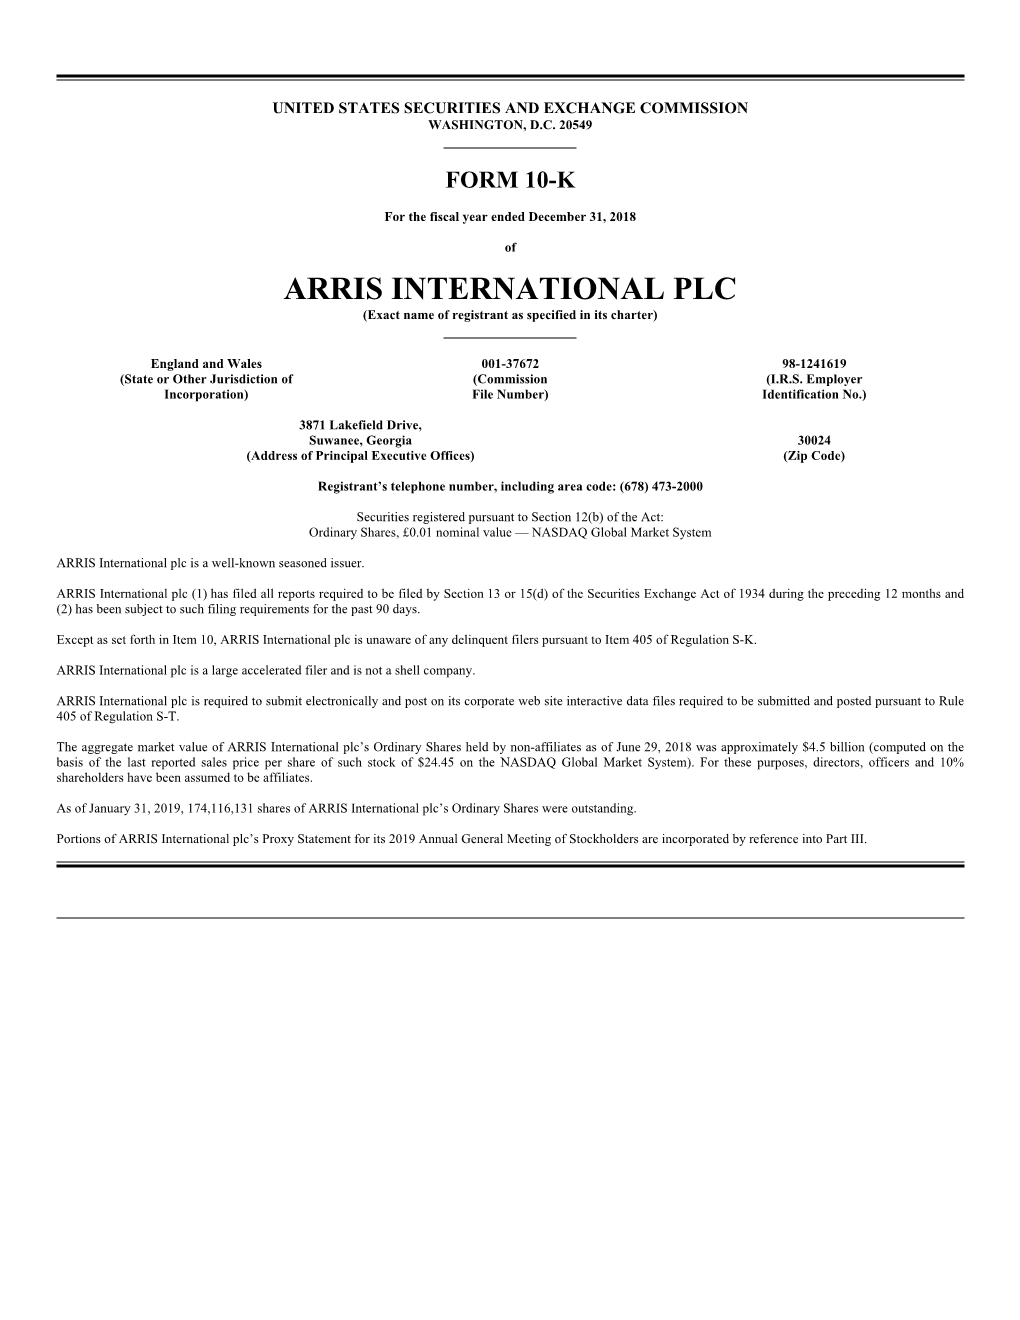 ARRIS INTERNATIONAL PLC (Exact Name of Registrant As Specified in Its Charter)